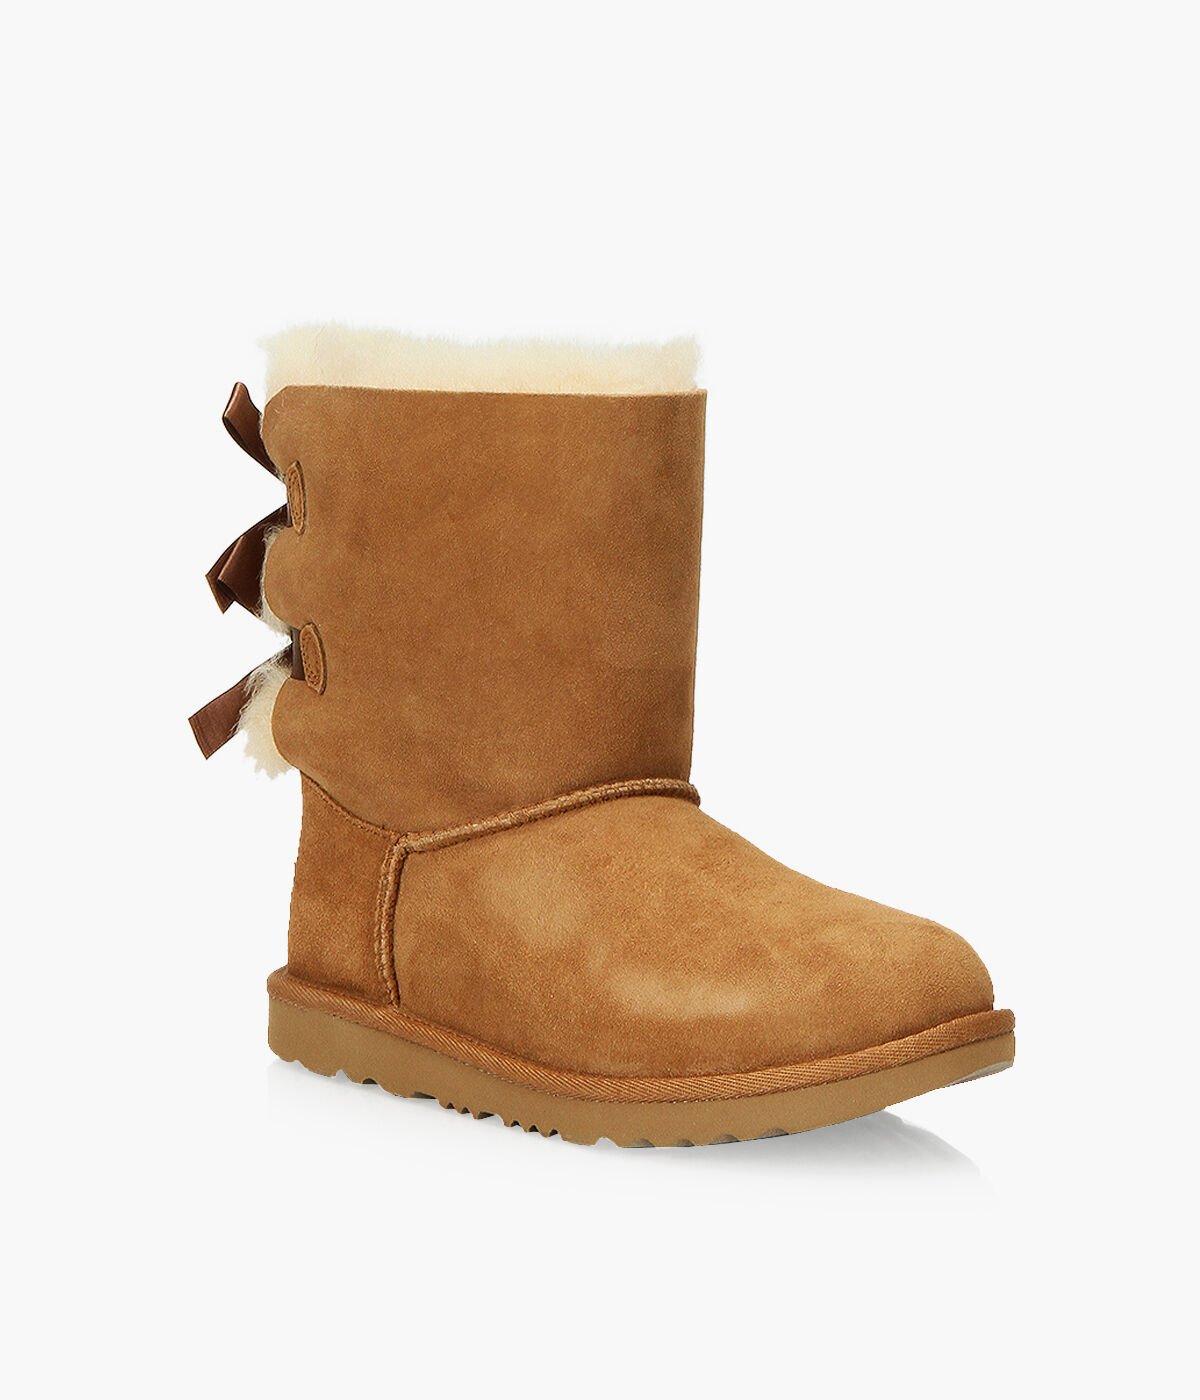 cyber monday ugg bailey bow